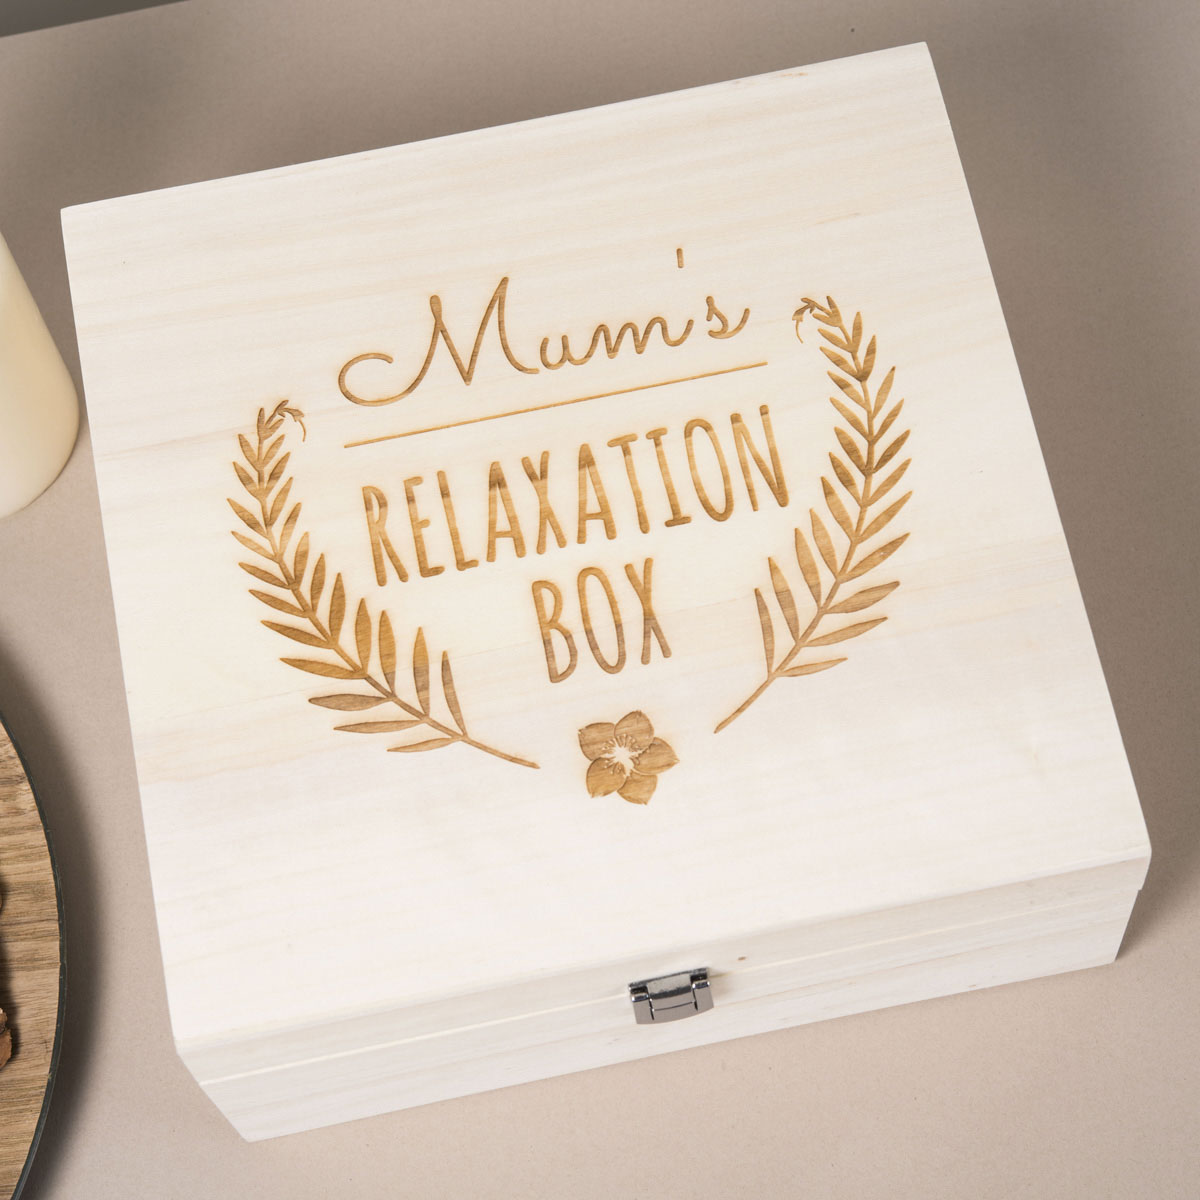 Engraved Wooden Storage Box - Relaxation Box